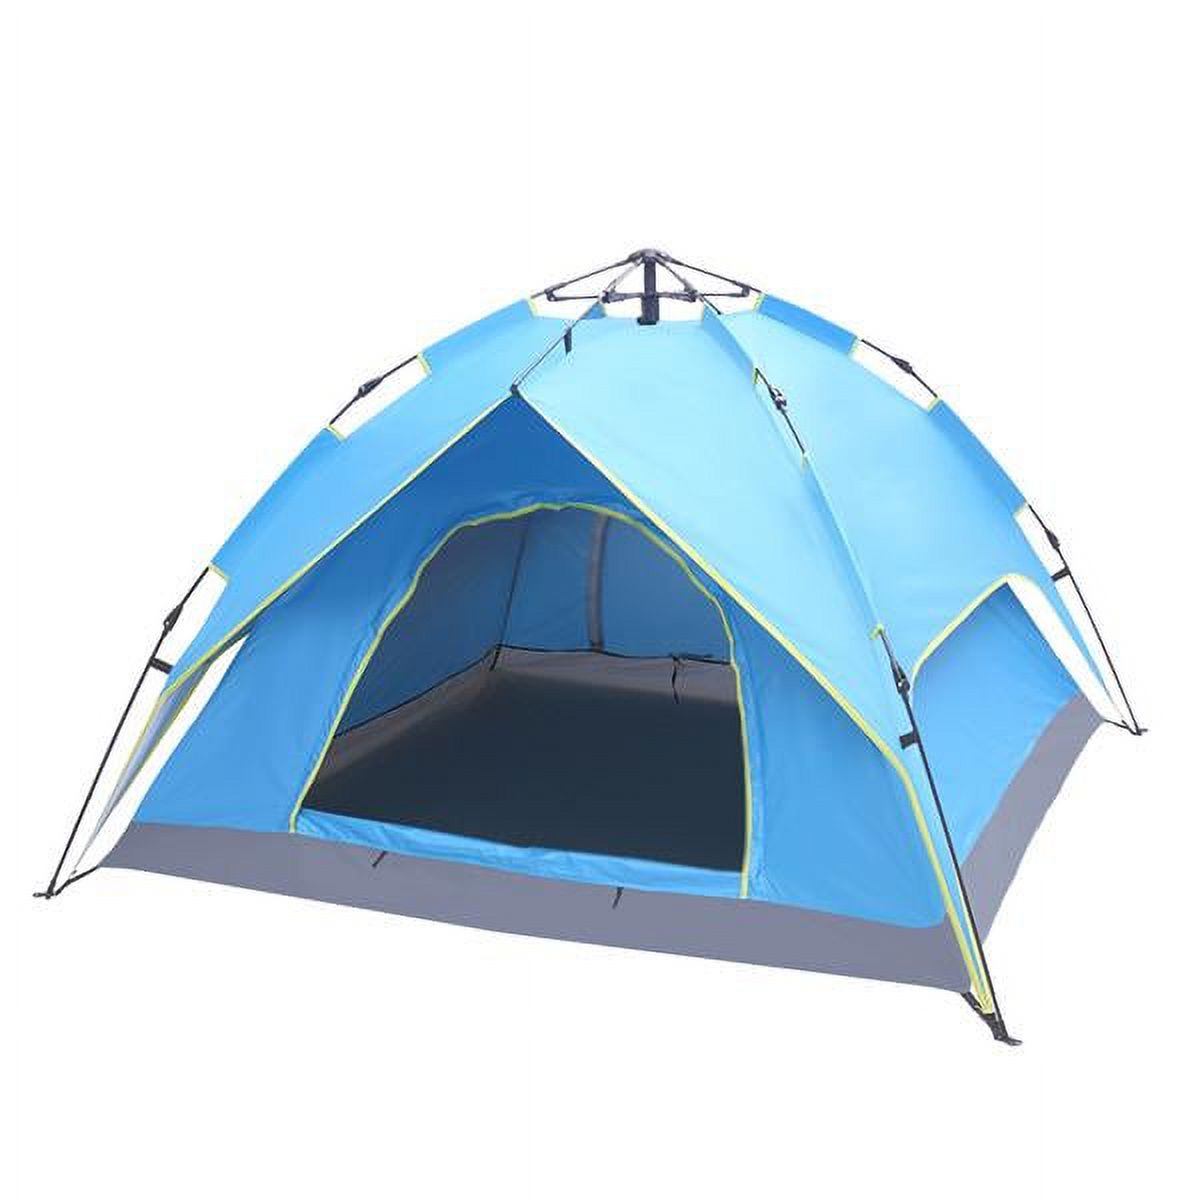 Camping Tent, YOFE Portable Instant Pop Up Tent, Automatic Pop Up Camp Tent with Handbag, Family Camping Tent for 2-3 Person, Pop Up Camping Tent for Hiking Travel, Waterproof Windproof, Blue, R4844 - image 2 of 12